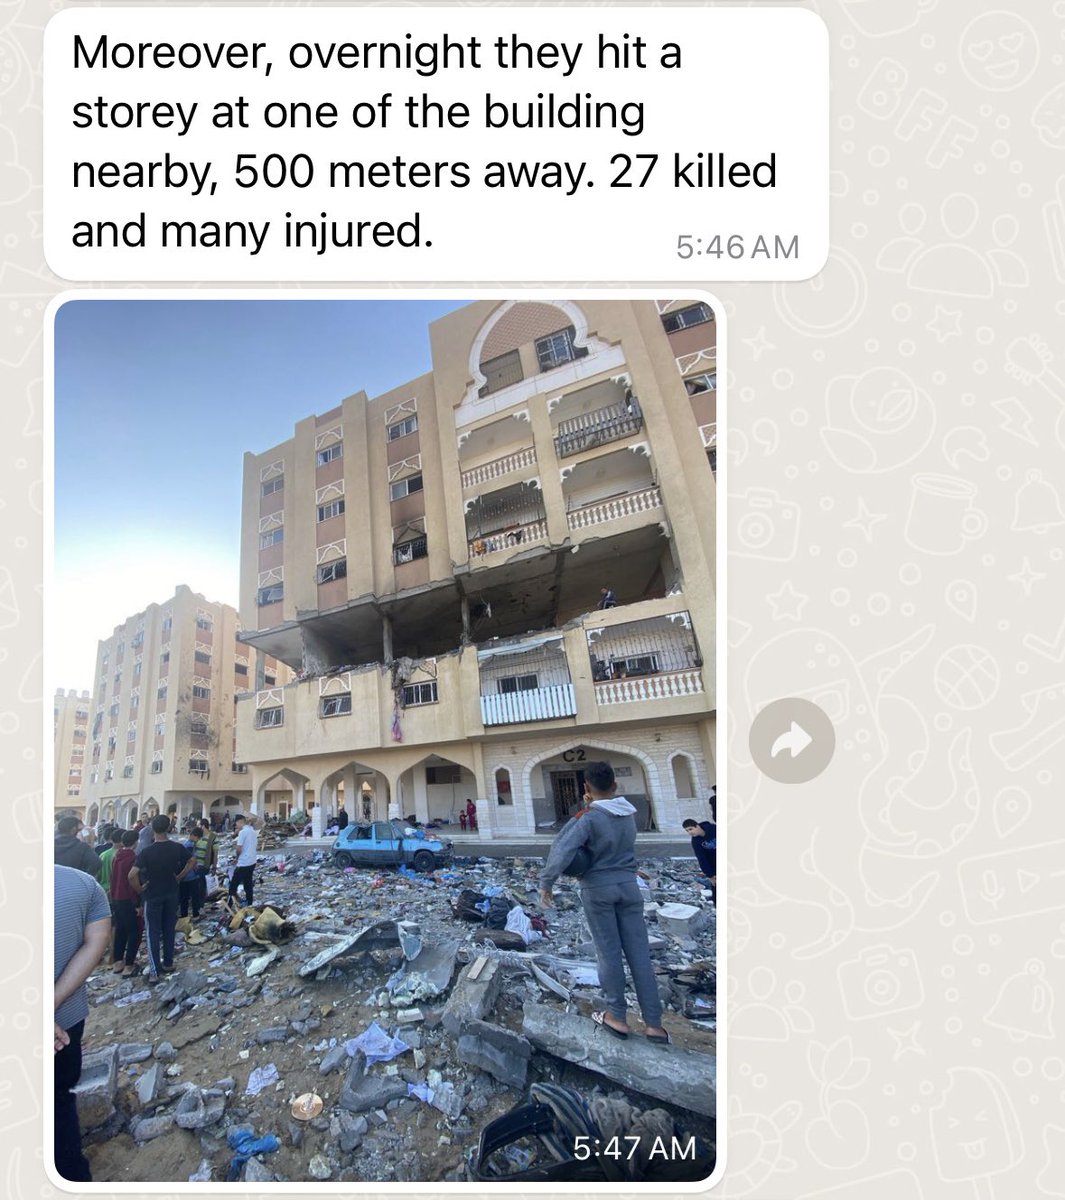 On top of massacring hundreds of sheltering Palestinians at a school last night, Israeli forces also bombed multiple residential buildings killing hundreds more. Death toll could be 1,000 overnight. Has barely made the news